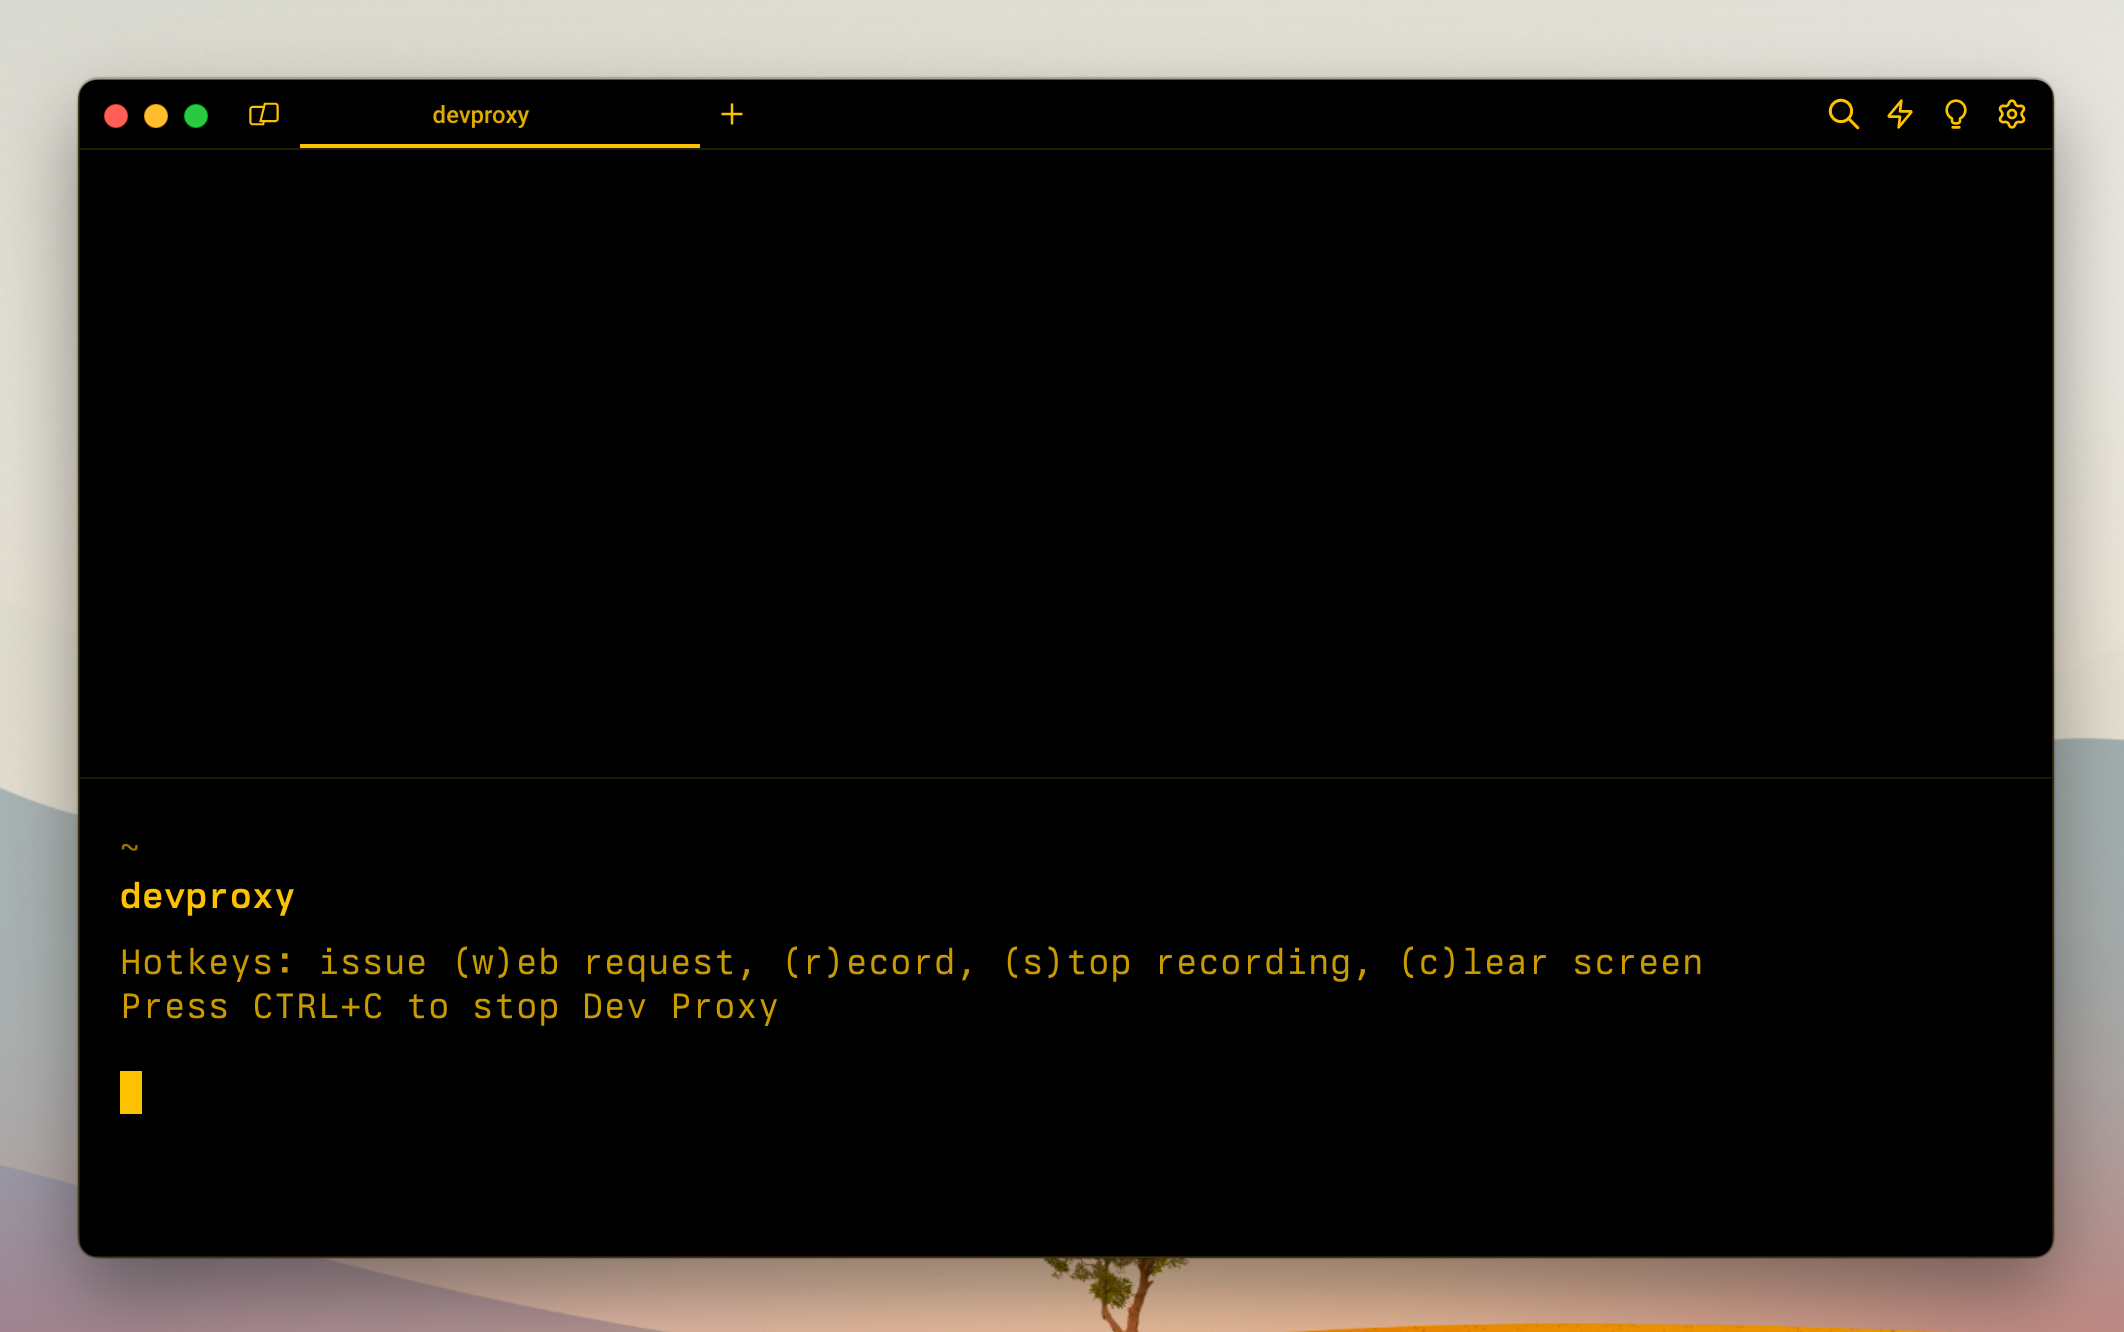 Code, Dev Proxy running in the terminal showing its hotkeys